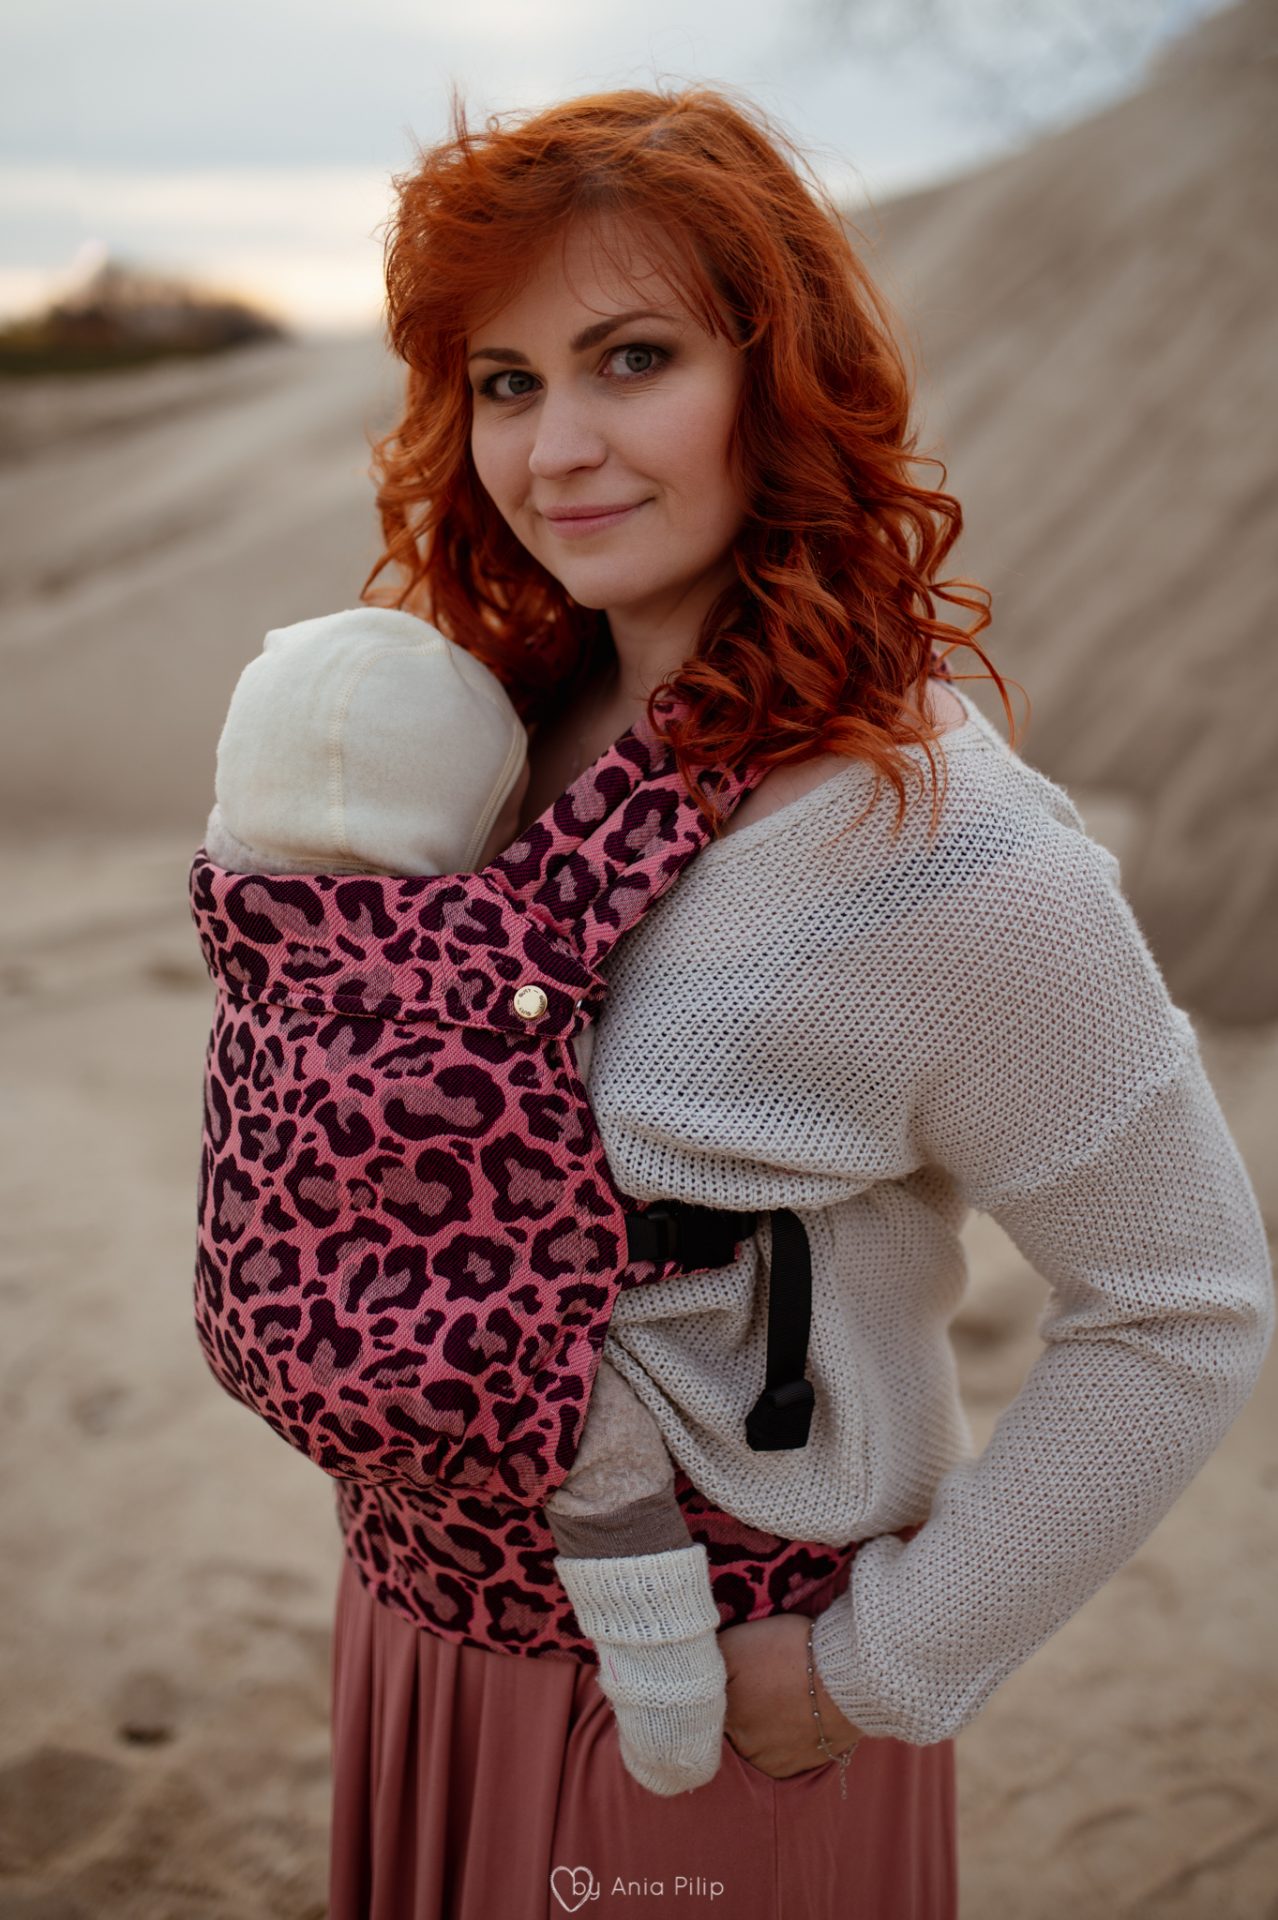 QUSY BABY CARRIER LEPARD PAPARAZZI